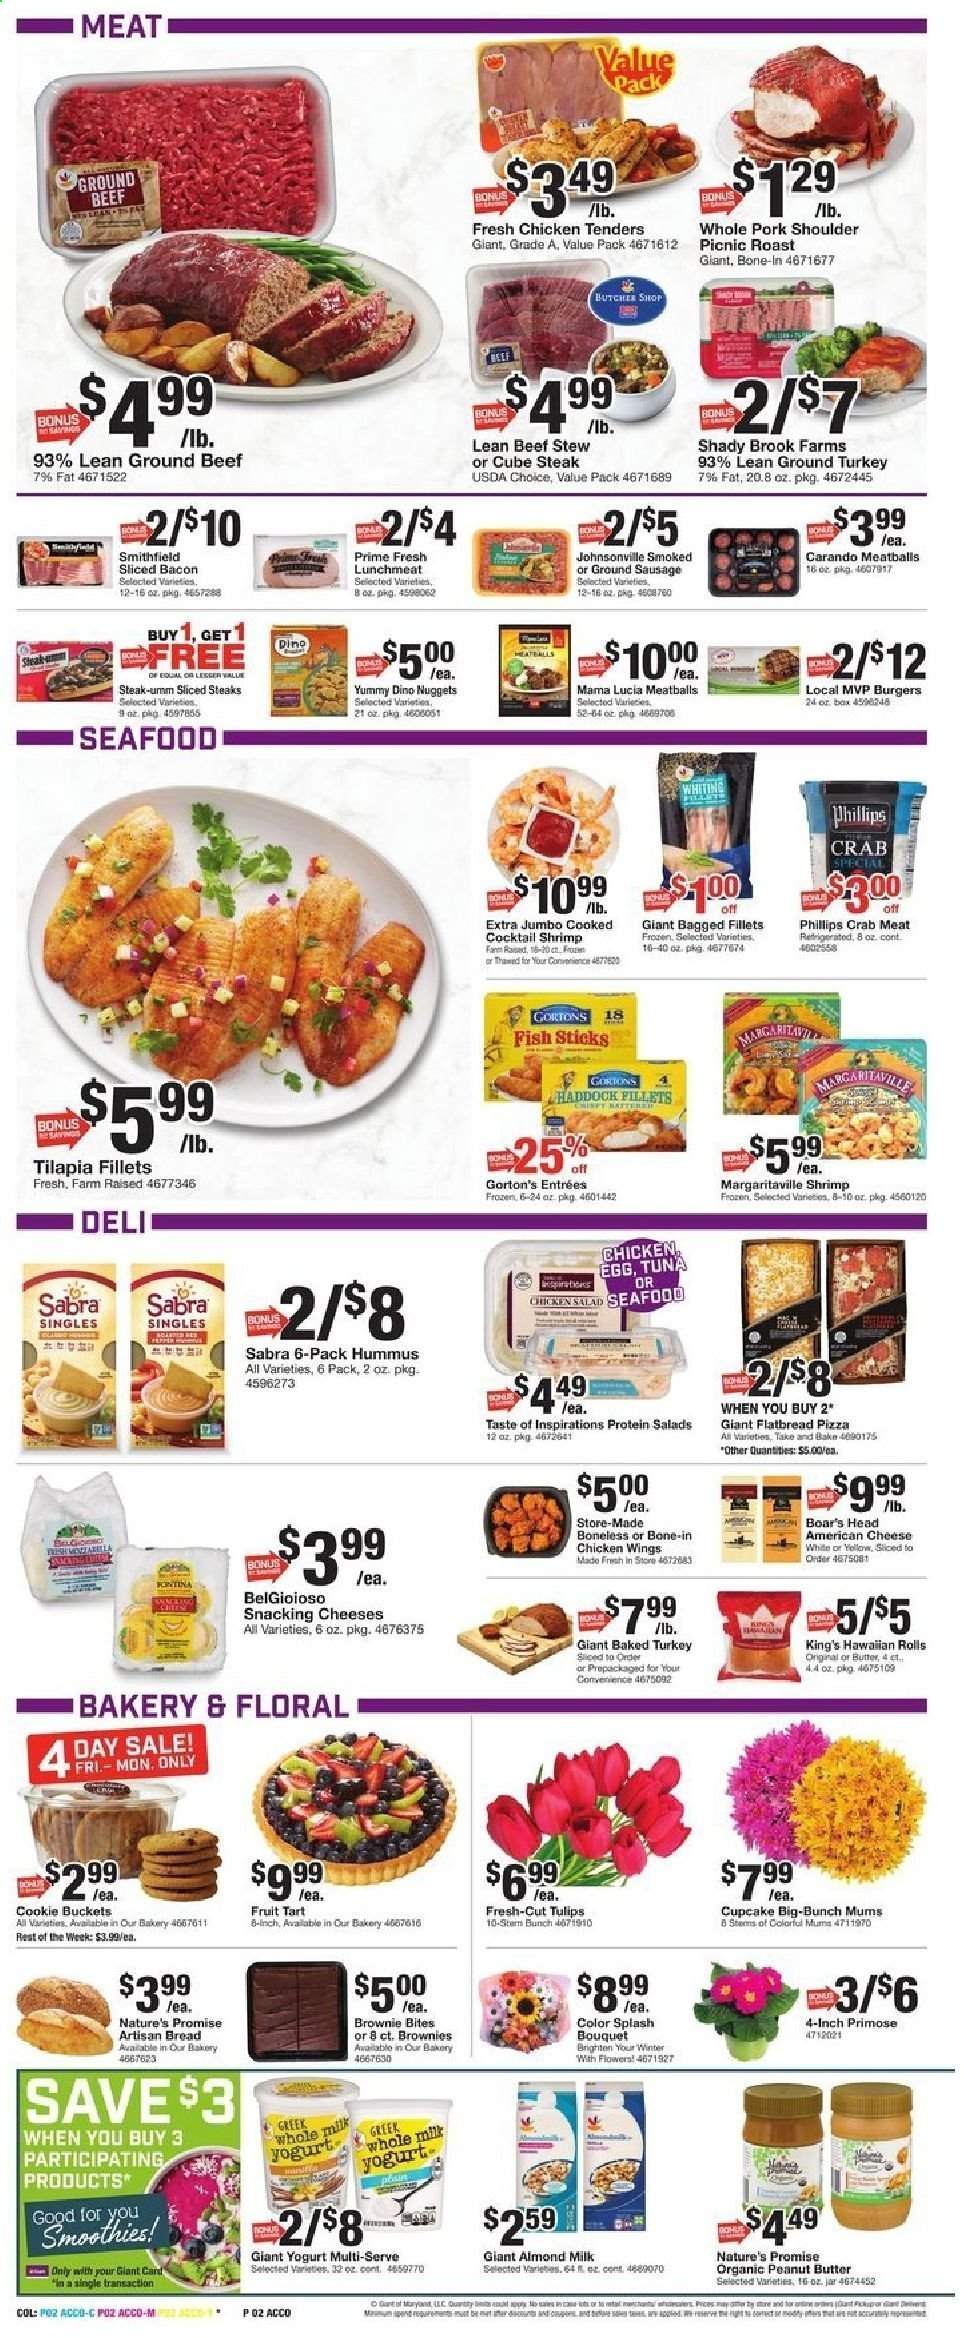 thumbnail - Giant Food Flyer - 01/15/2021 - 01/21/2021 - Sales products - bread, Nature’s Promise, flatbread, Johnsonville, cupcake, hawaiian rolls, tart, brownies, fruit tart, crab meat, tilapia, tuna, haddock, seafood, crab, fish, shrimps, whiting, Gorton's, pizza, meatballs, nuggets, hamburger, salad, fish sticks, bacon, sausage, hummus, chicken salad, lunch meat, american cheese, Fontina, cheese, yoghurt, almond milk, eggs, chicken wings, peanut butter, smoothie, chicken tenders, beef meat, ground beef, steak, pork meat, pork shoulder, tulip, bouquet. Page 2.